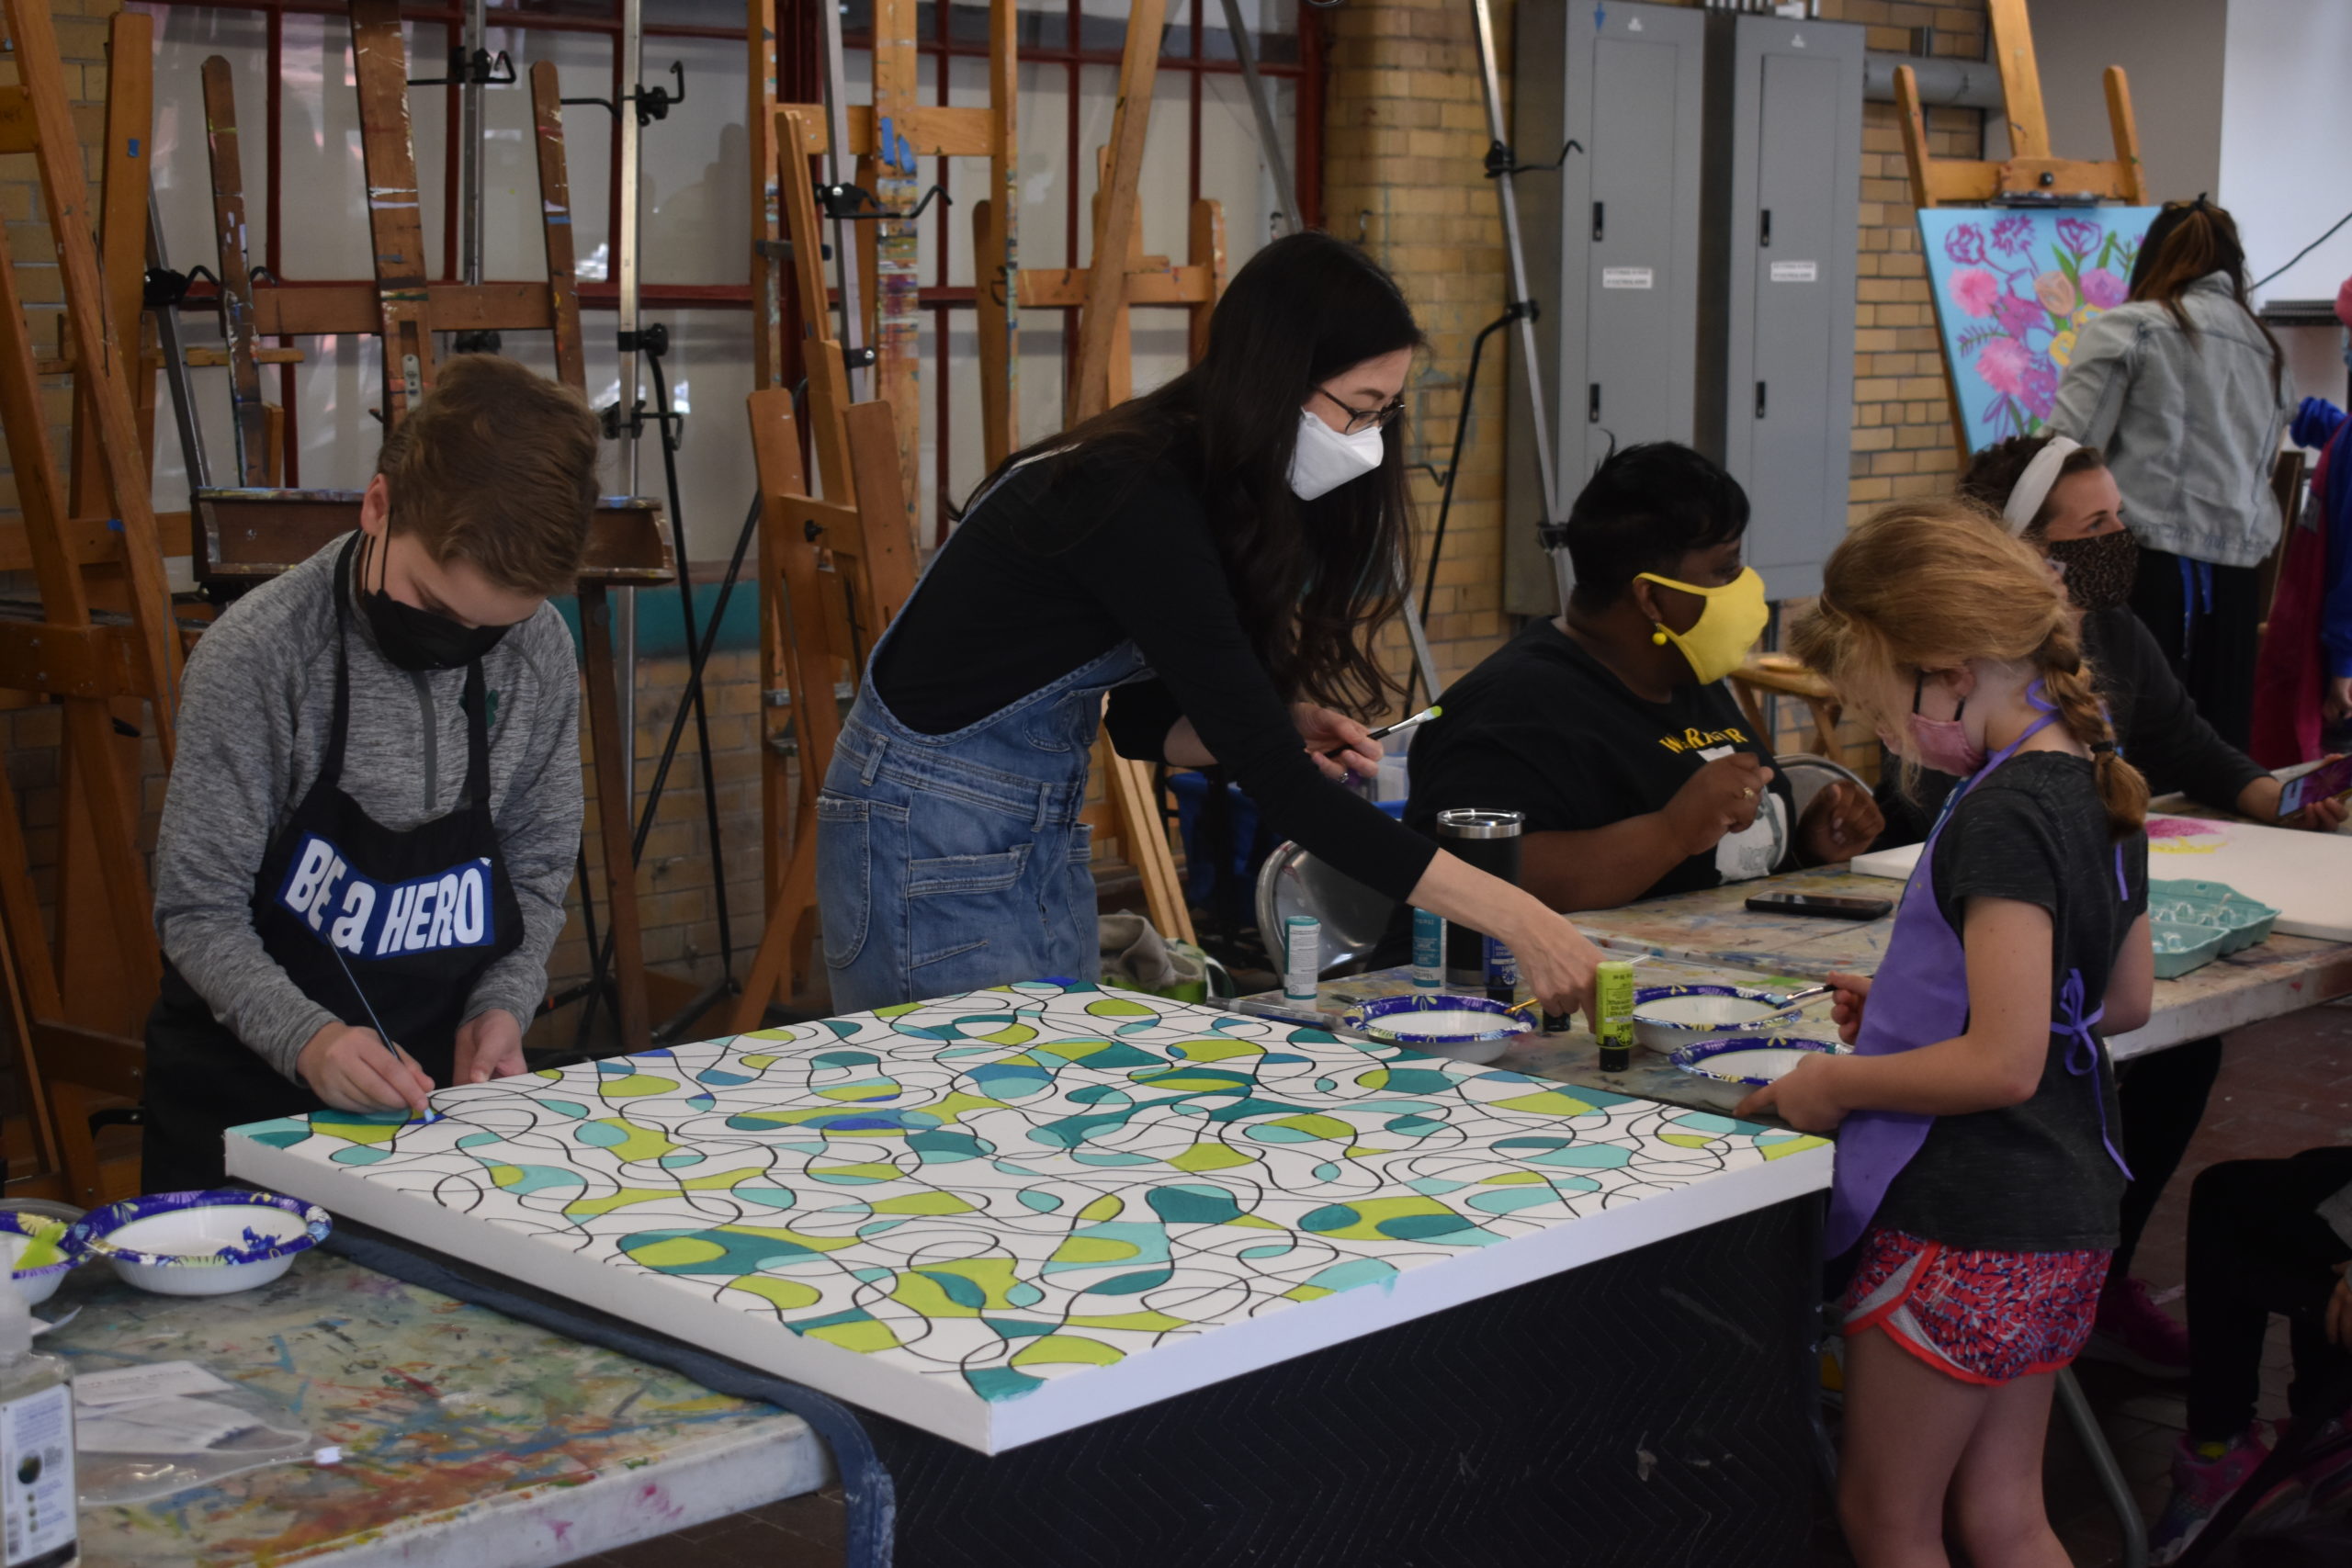 An art studio with kids and adults working on different paintings